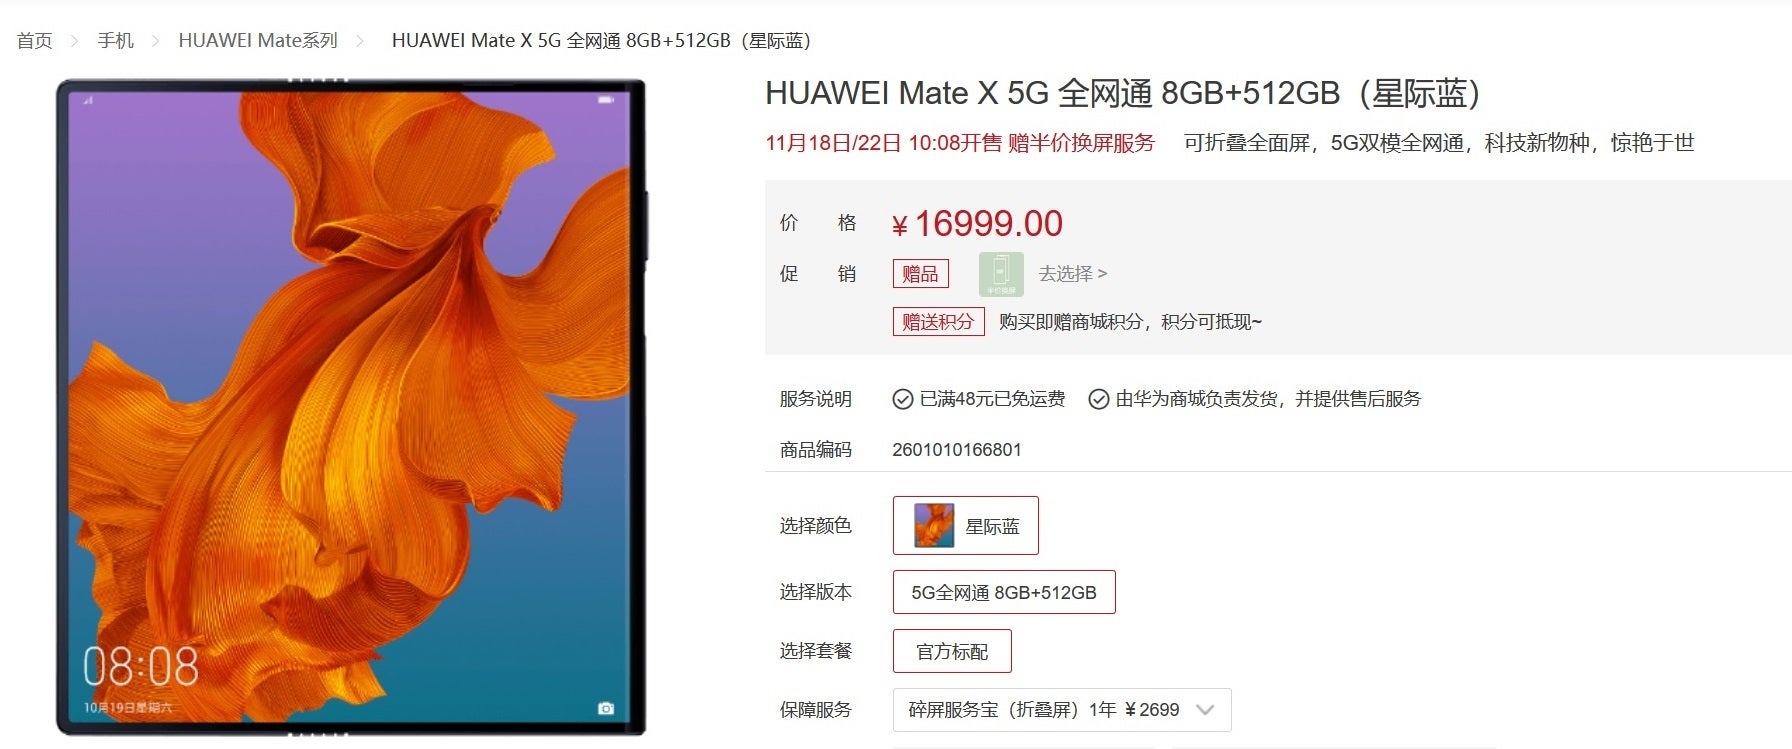 The foldable Huawei Mate X sold out today during its first flash sale - Foldable Huawei Mate X 5G sells out limited flash sale in less than a minute